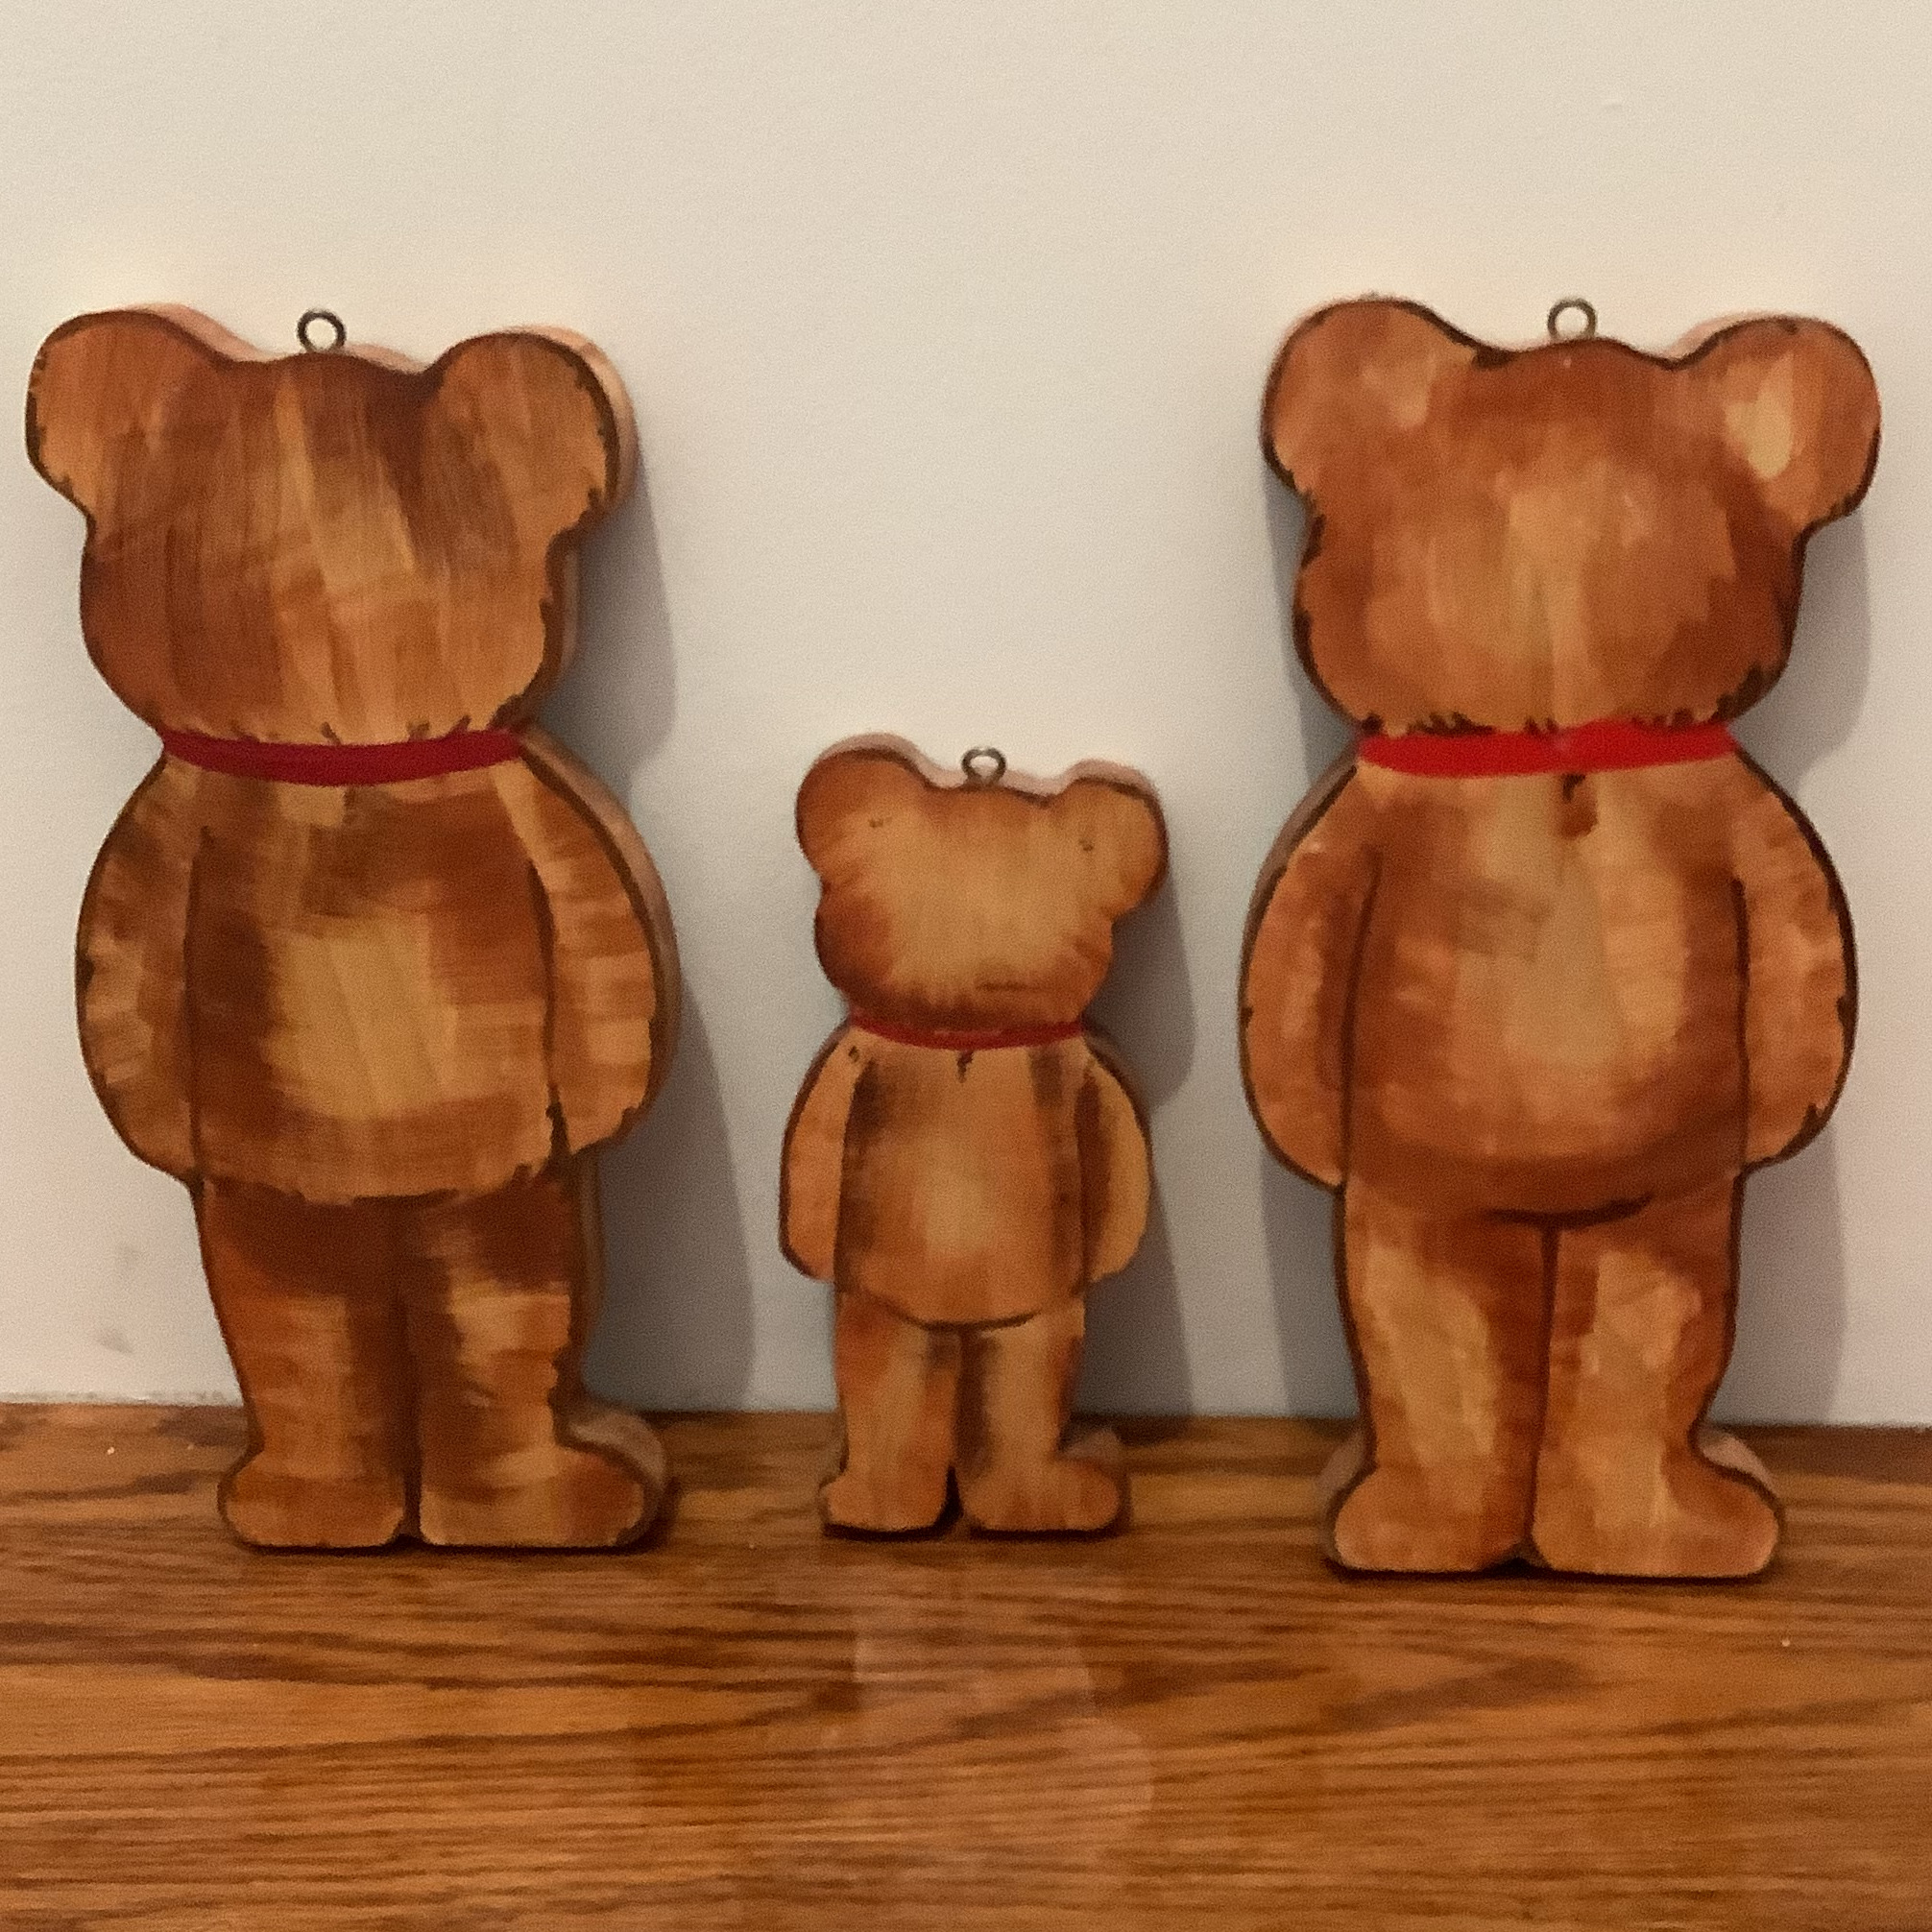 Back view of wooden bears, also painted